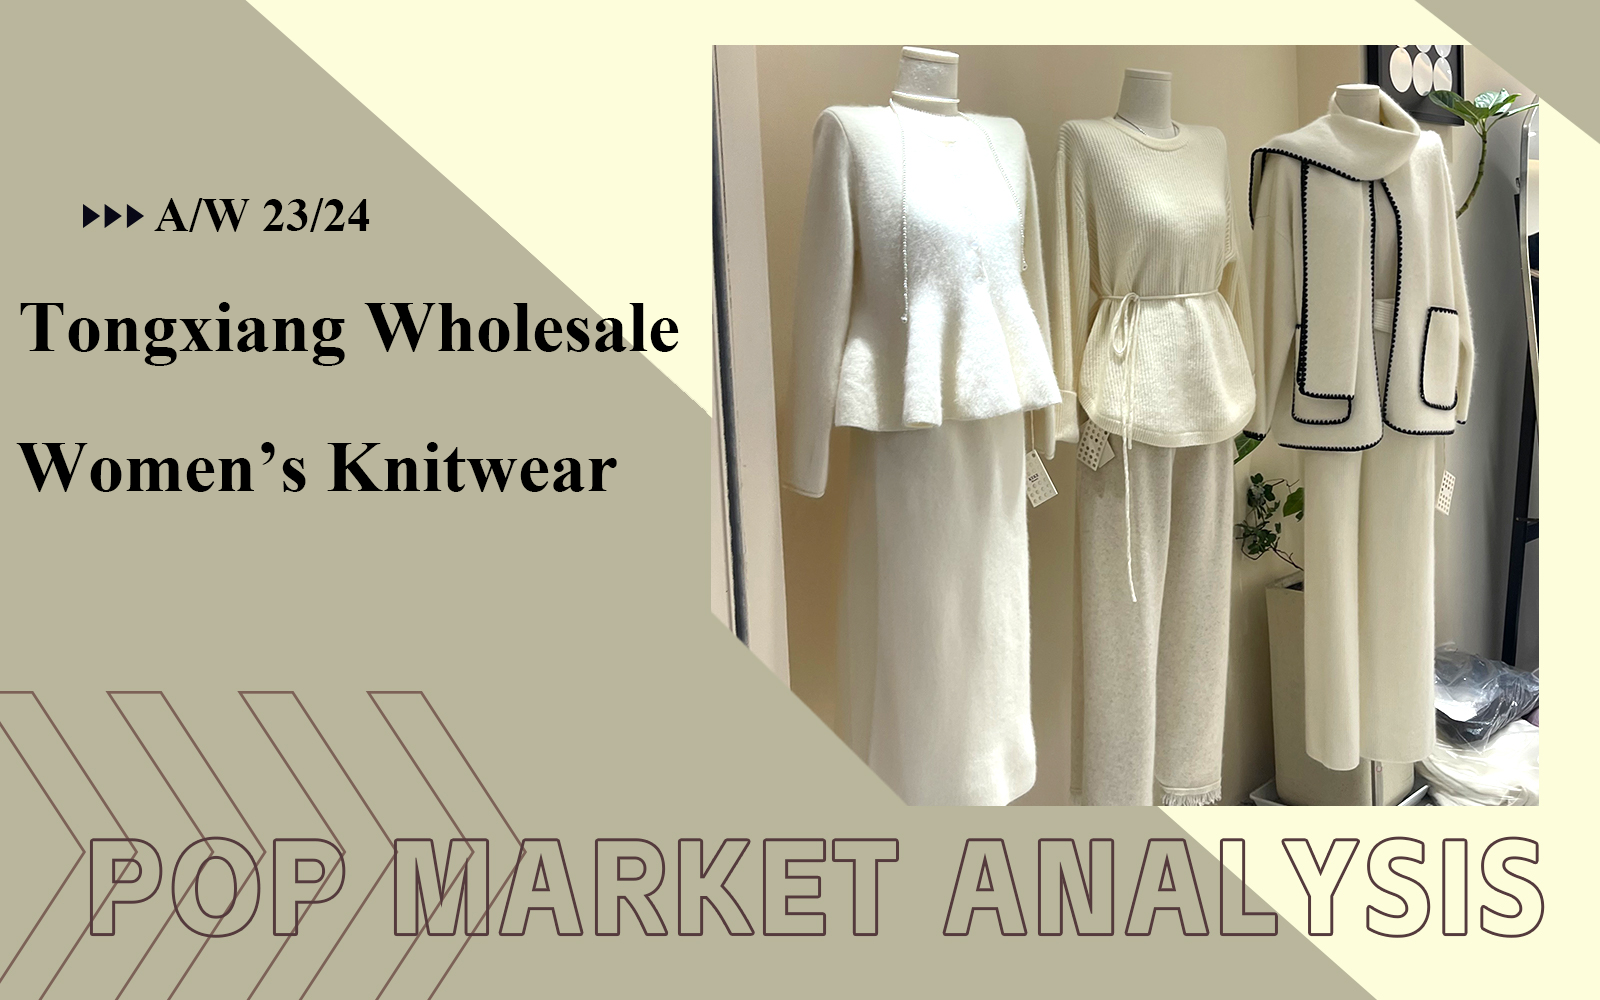 The Analysis of Tongxiang Women's Knitwear Wholesale Market in October